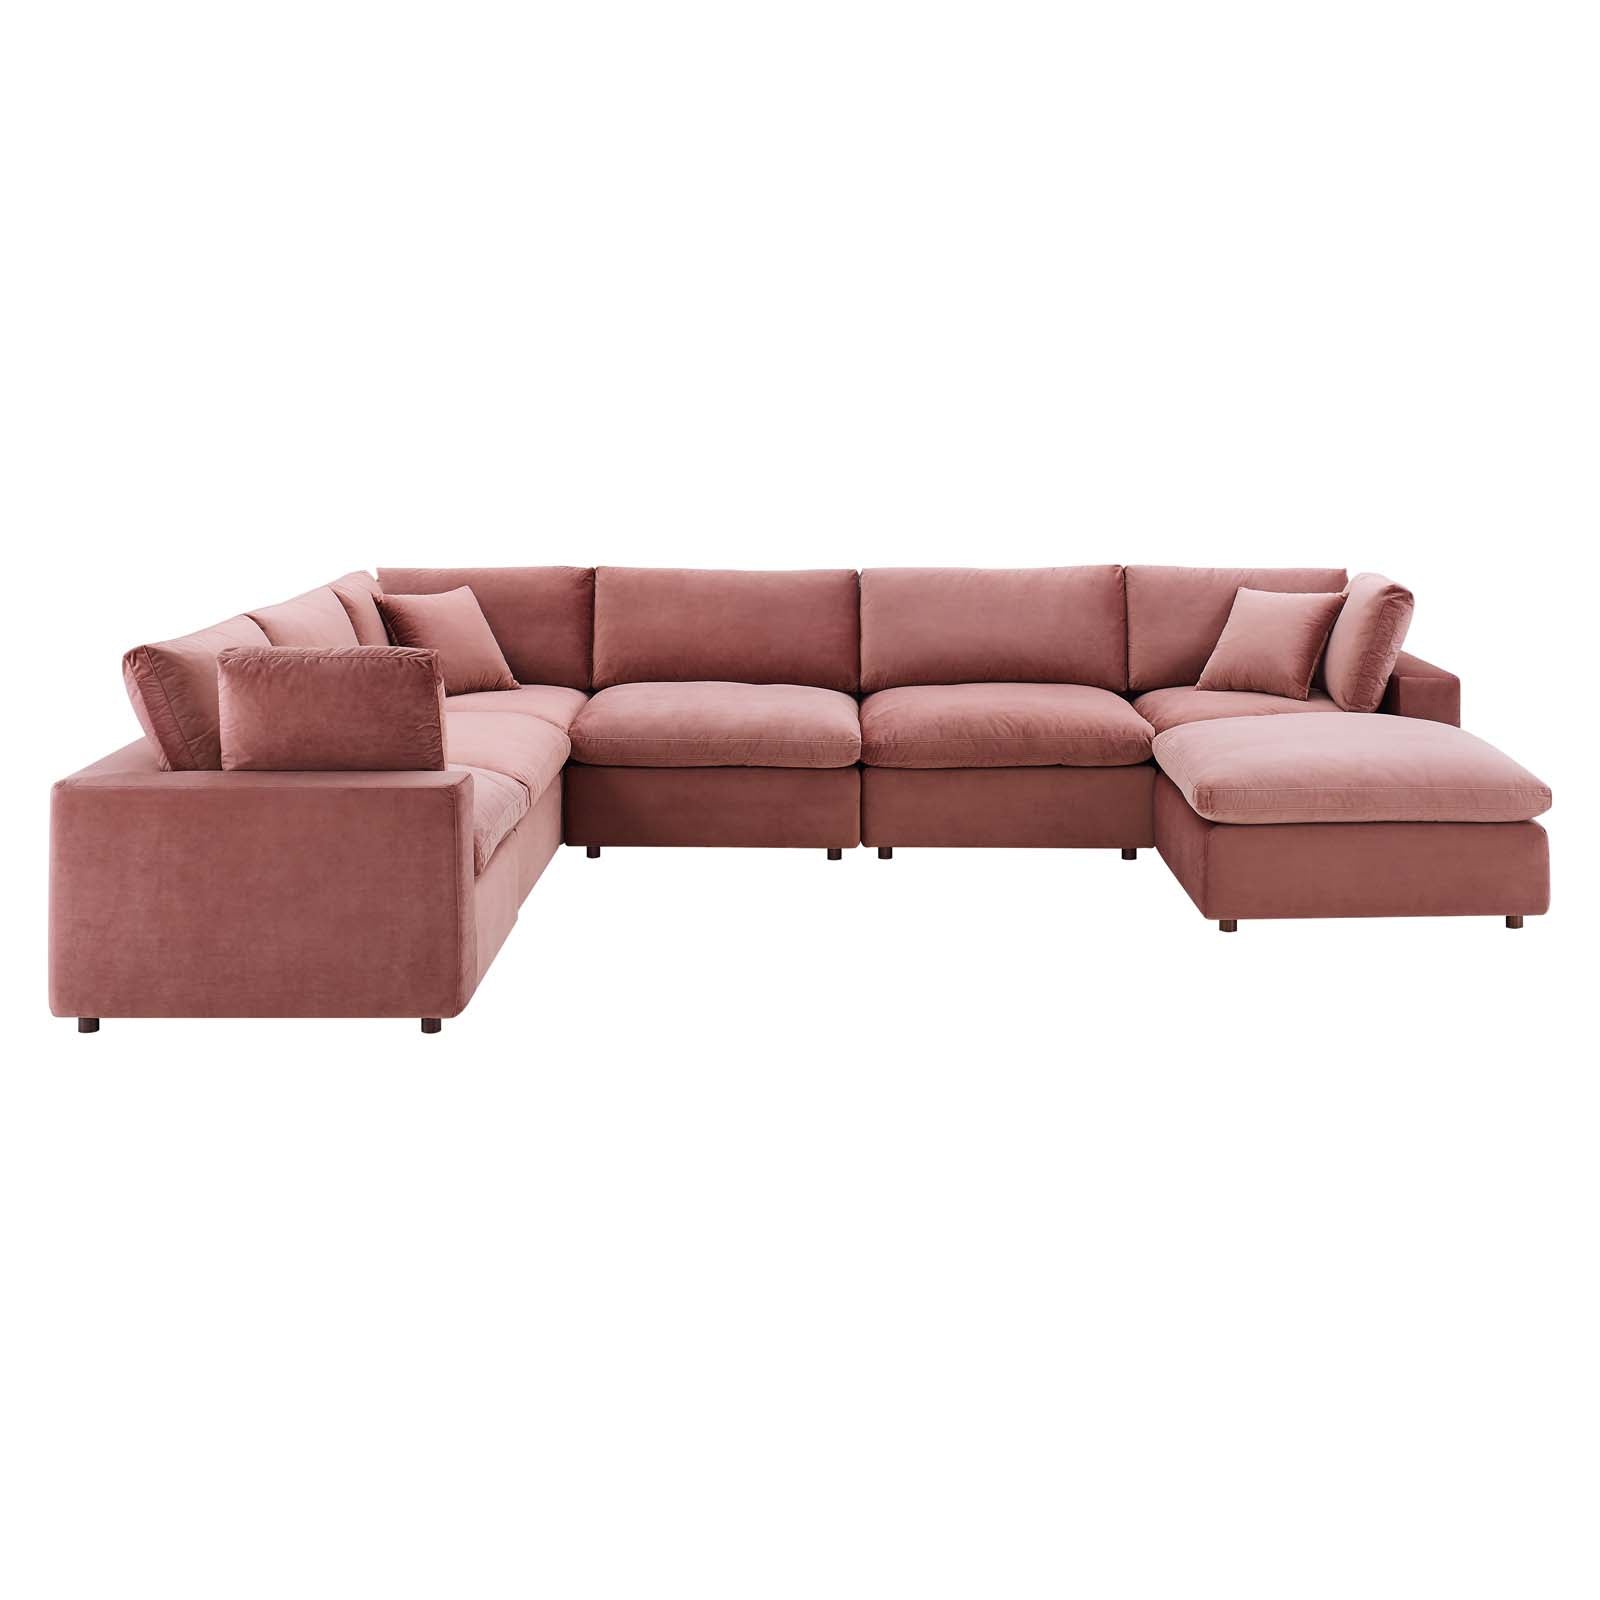 Commix Down Filled Overstuffed Performance Velvet 7-Piece Sectional Sofa